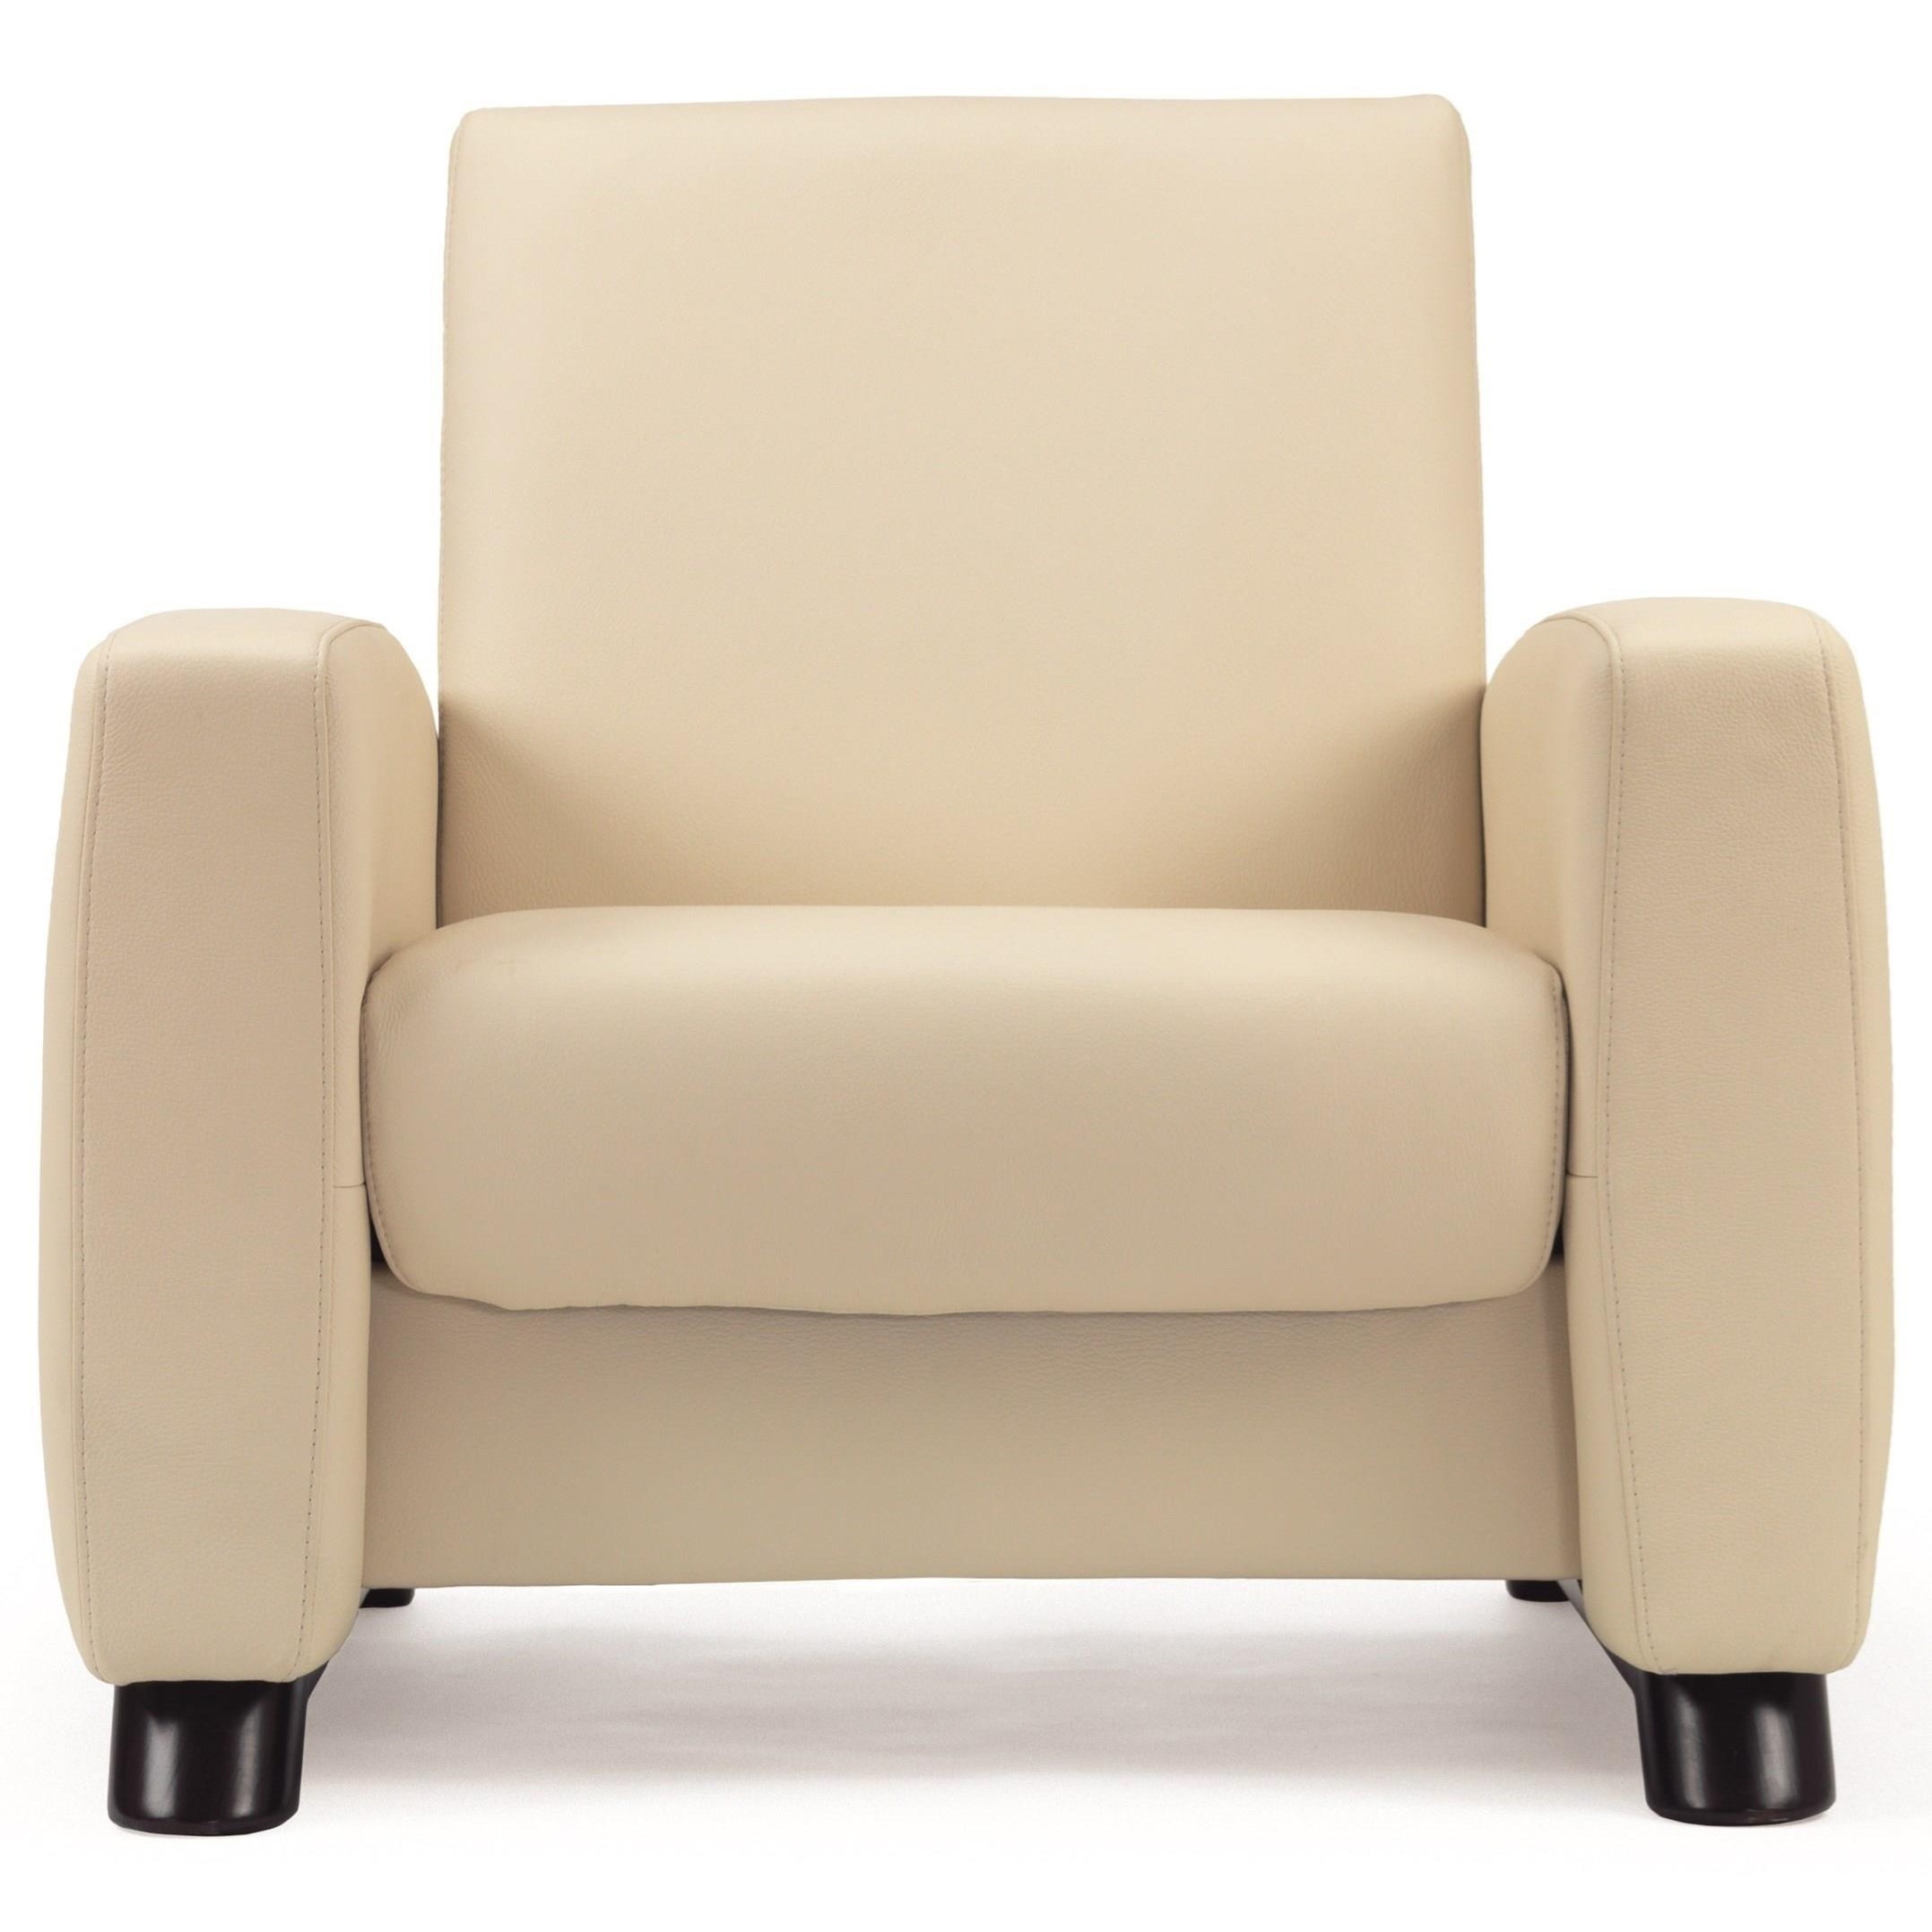 Stressless arion 19 a10 contemporary low back reclining